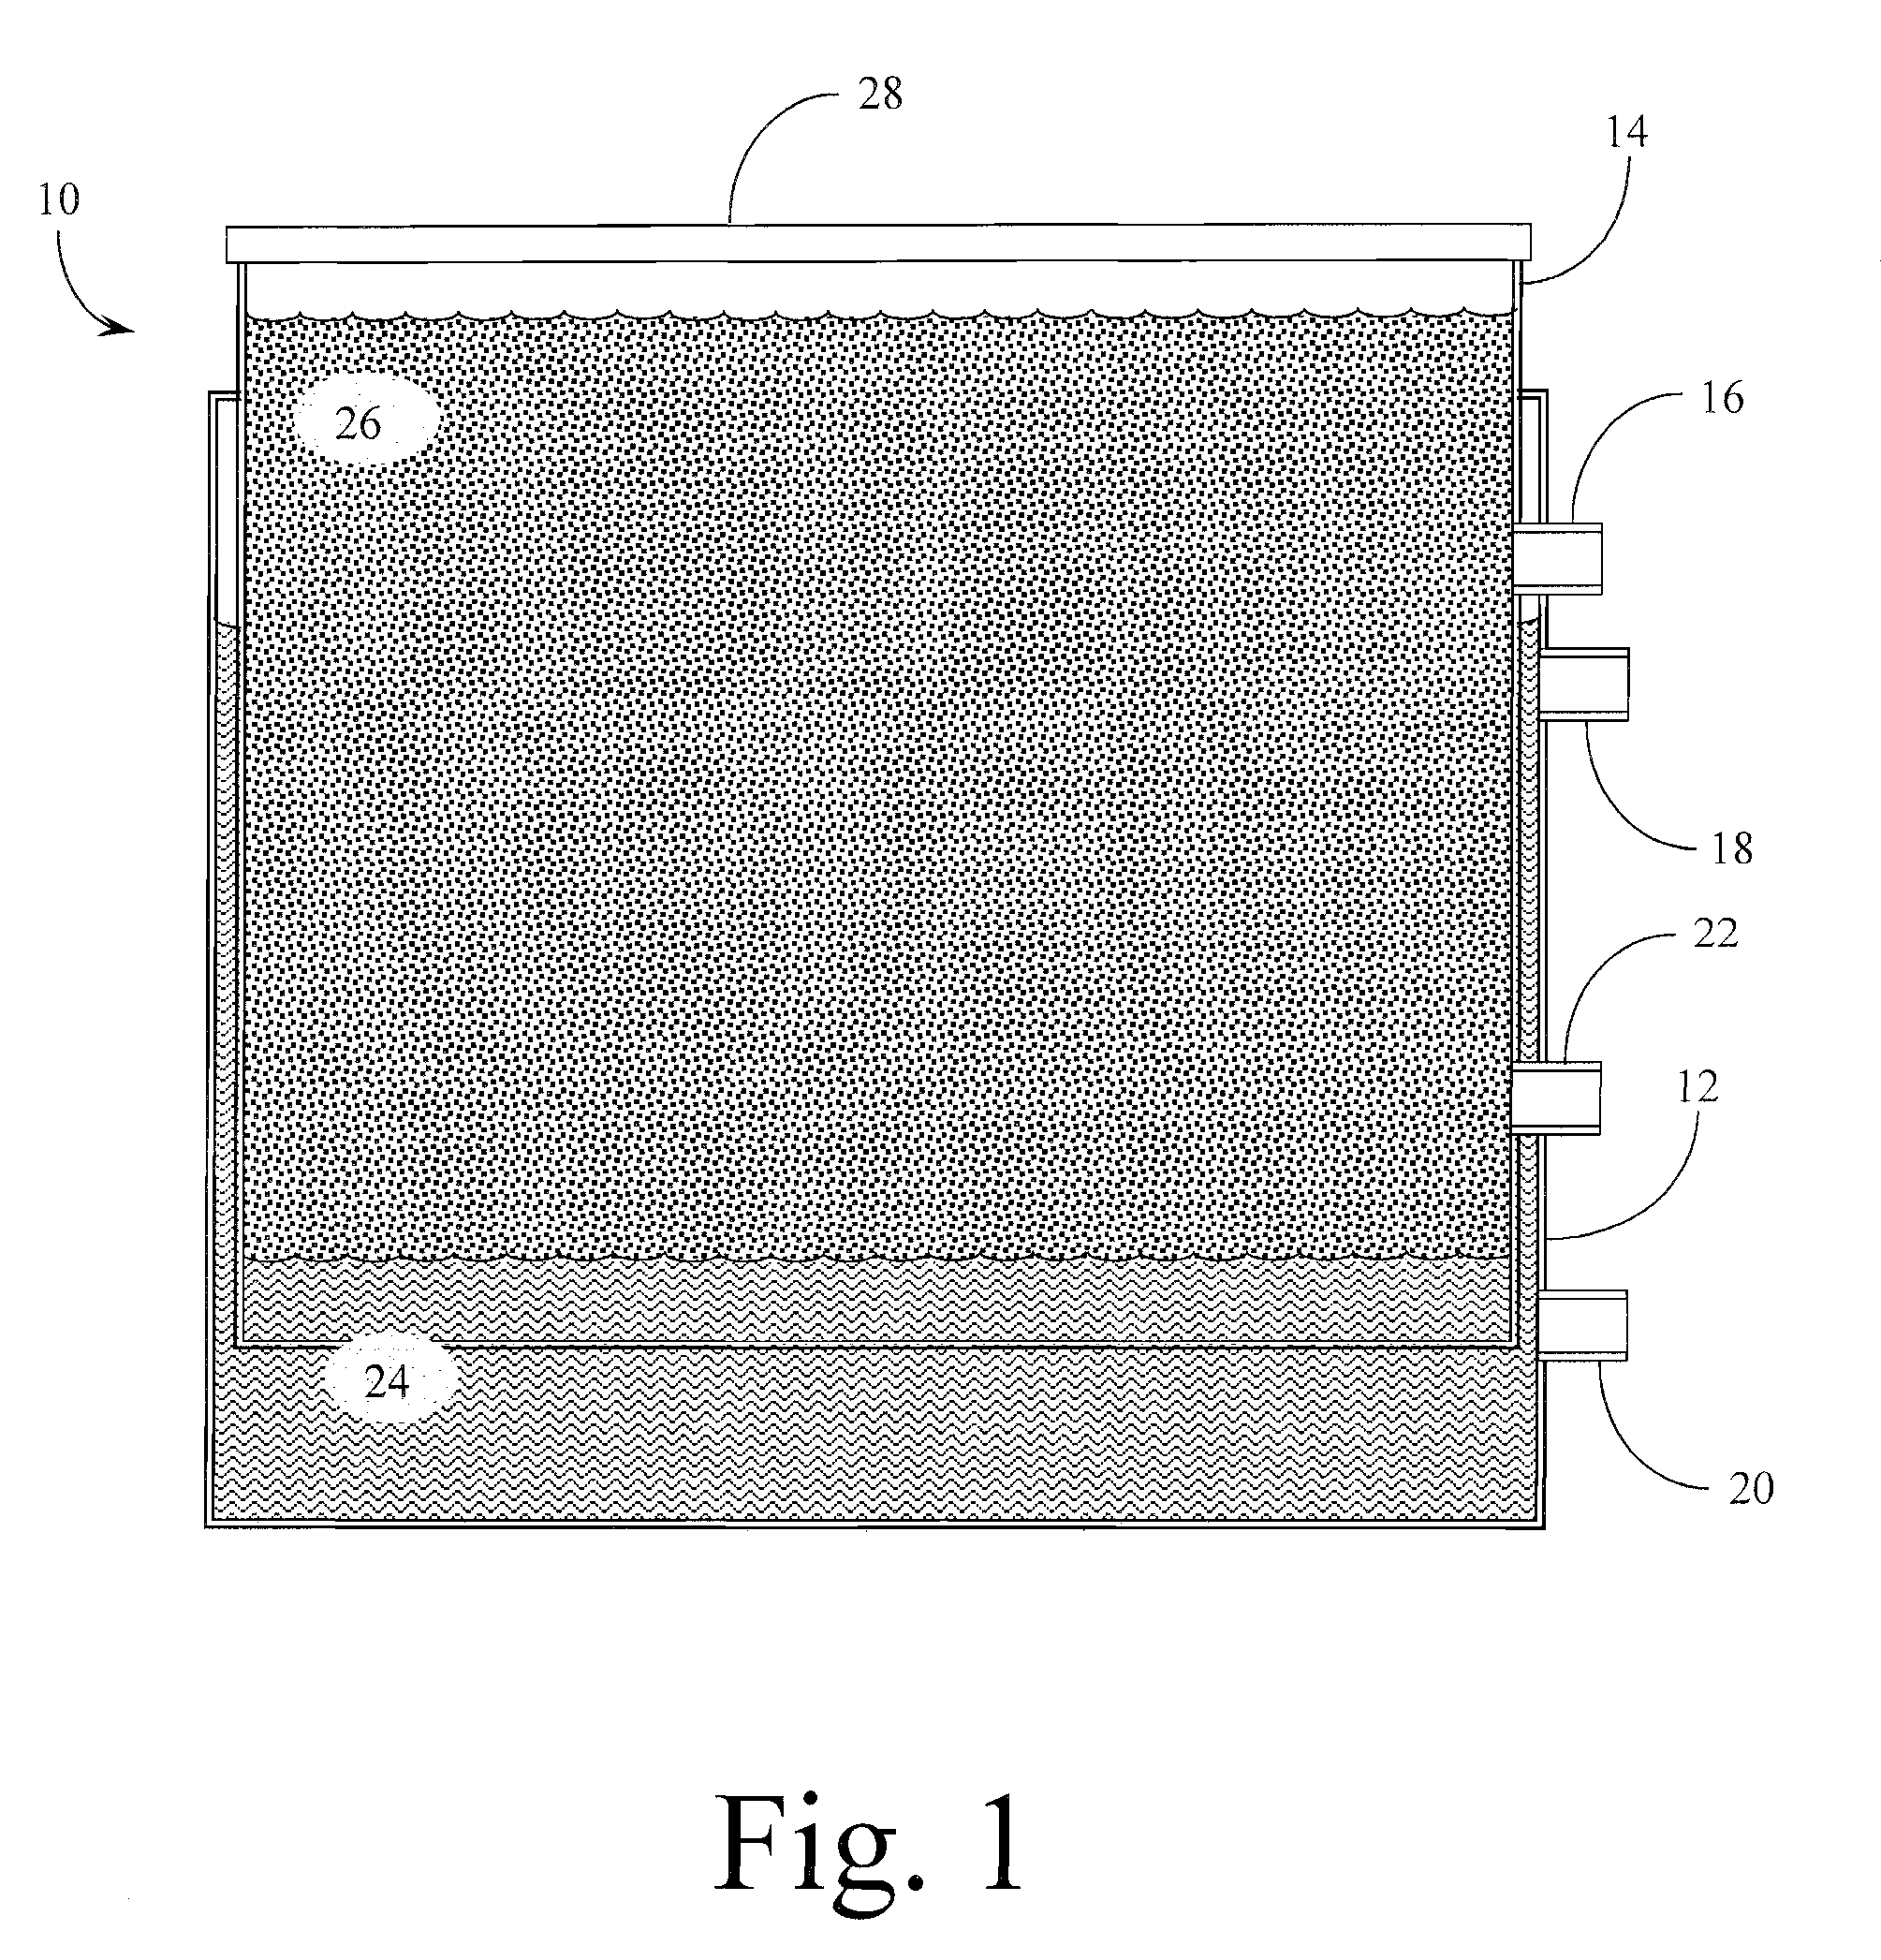 System and Method for Extraction of Petroleum from Oil/Water Mixture